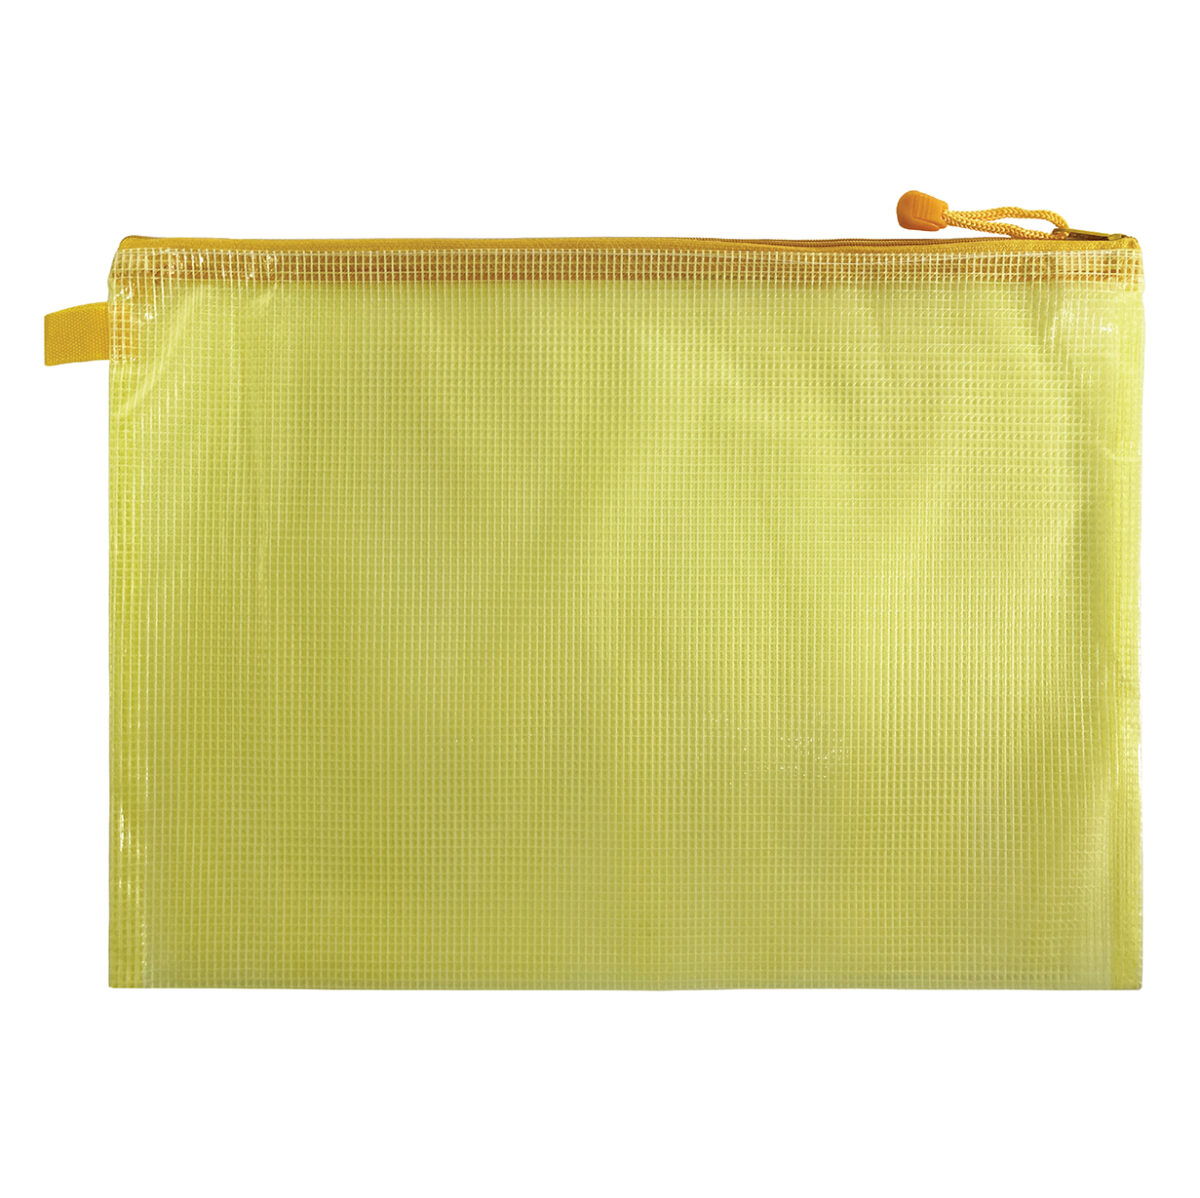 Translucent Mesh Bag/ Mesh Pouch with Zipper